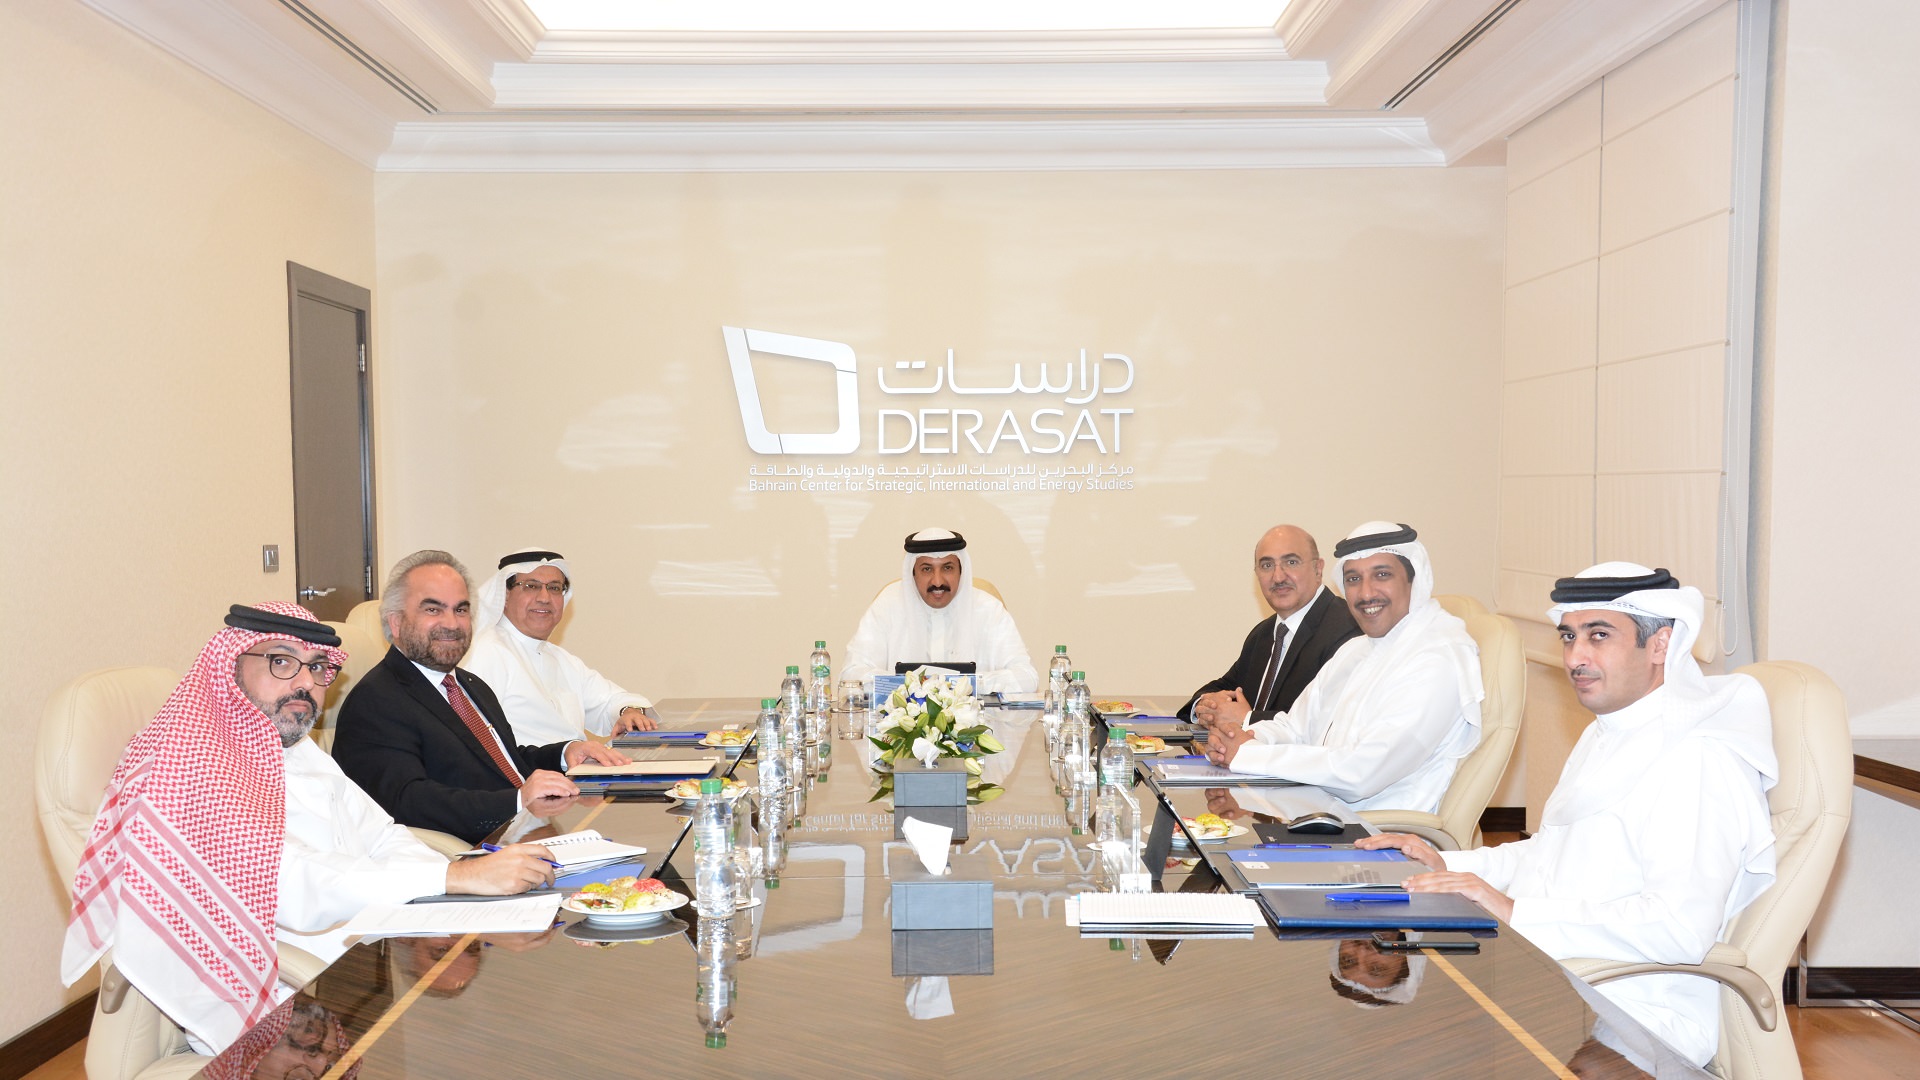 The Derasat Board of Trustees meets for Quarterly Updates